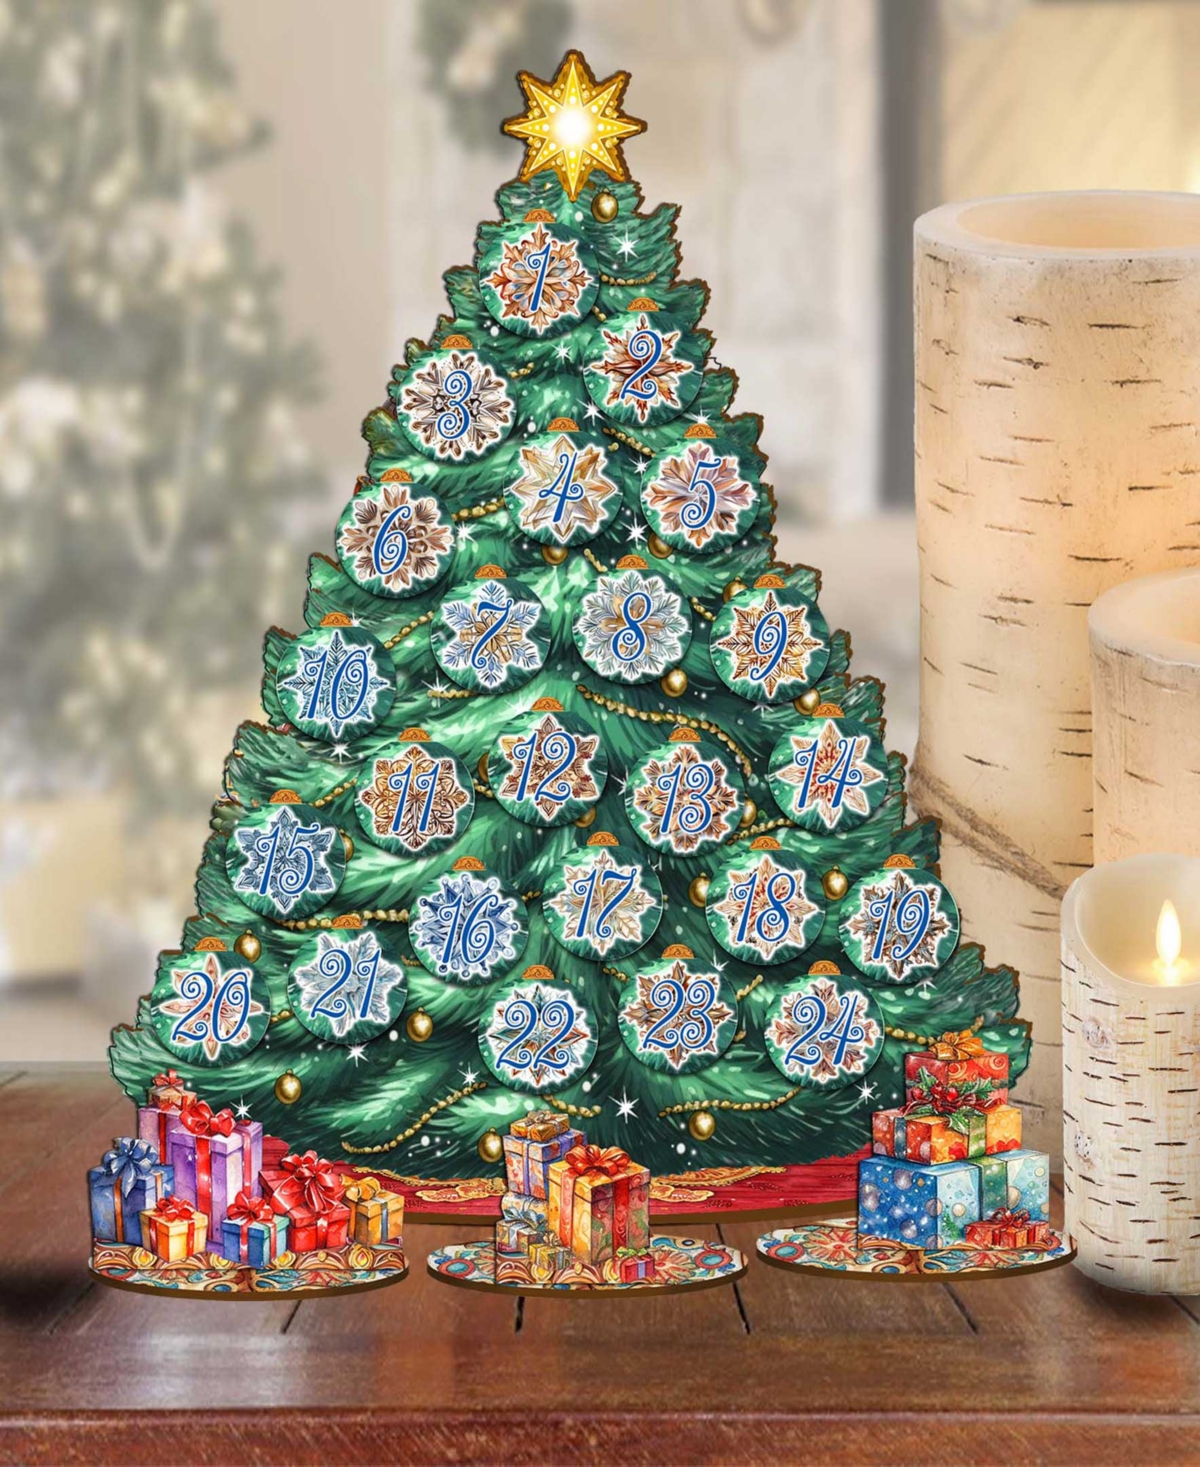 Designocracy Advent Calendar Themed Wooden Christmas Tree With Ornaments Set Of 28 G. Debrekht In Multi Color